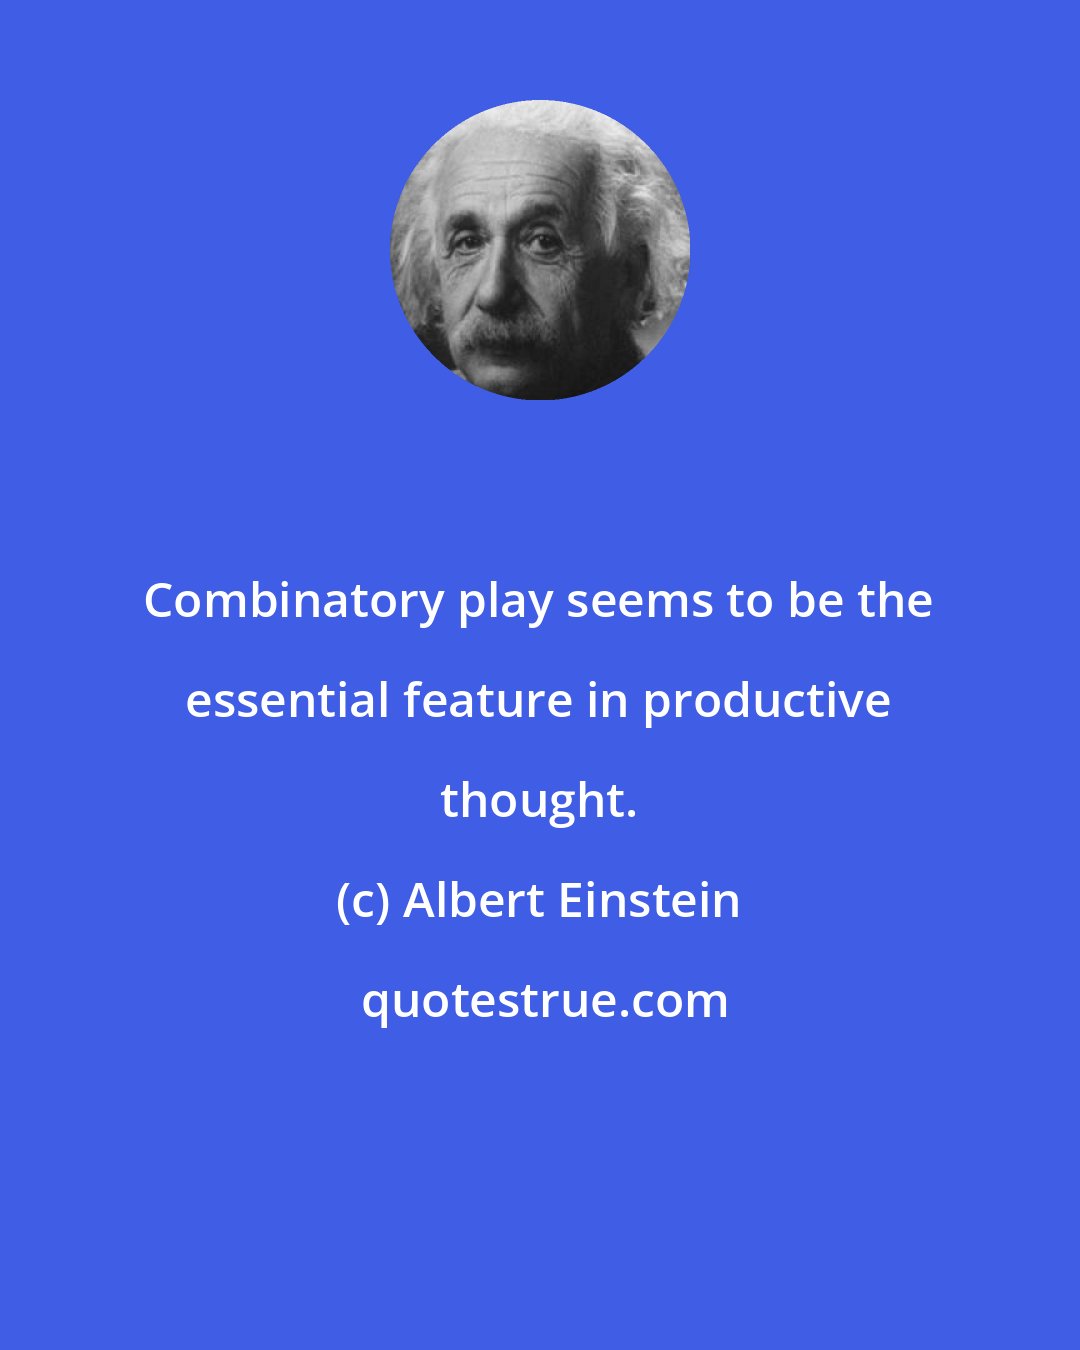 Albert Einstein: Combinatory play seems to be the essential feature in productive thought.